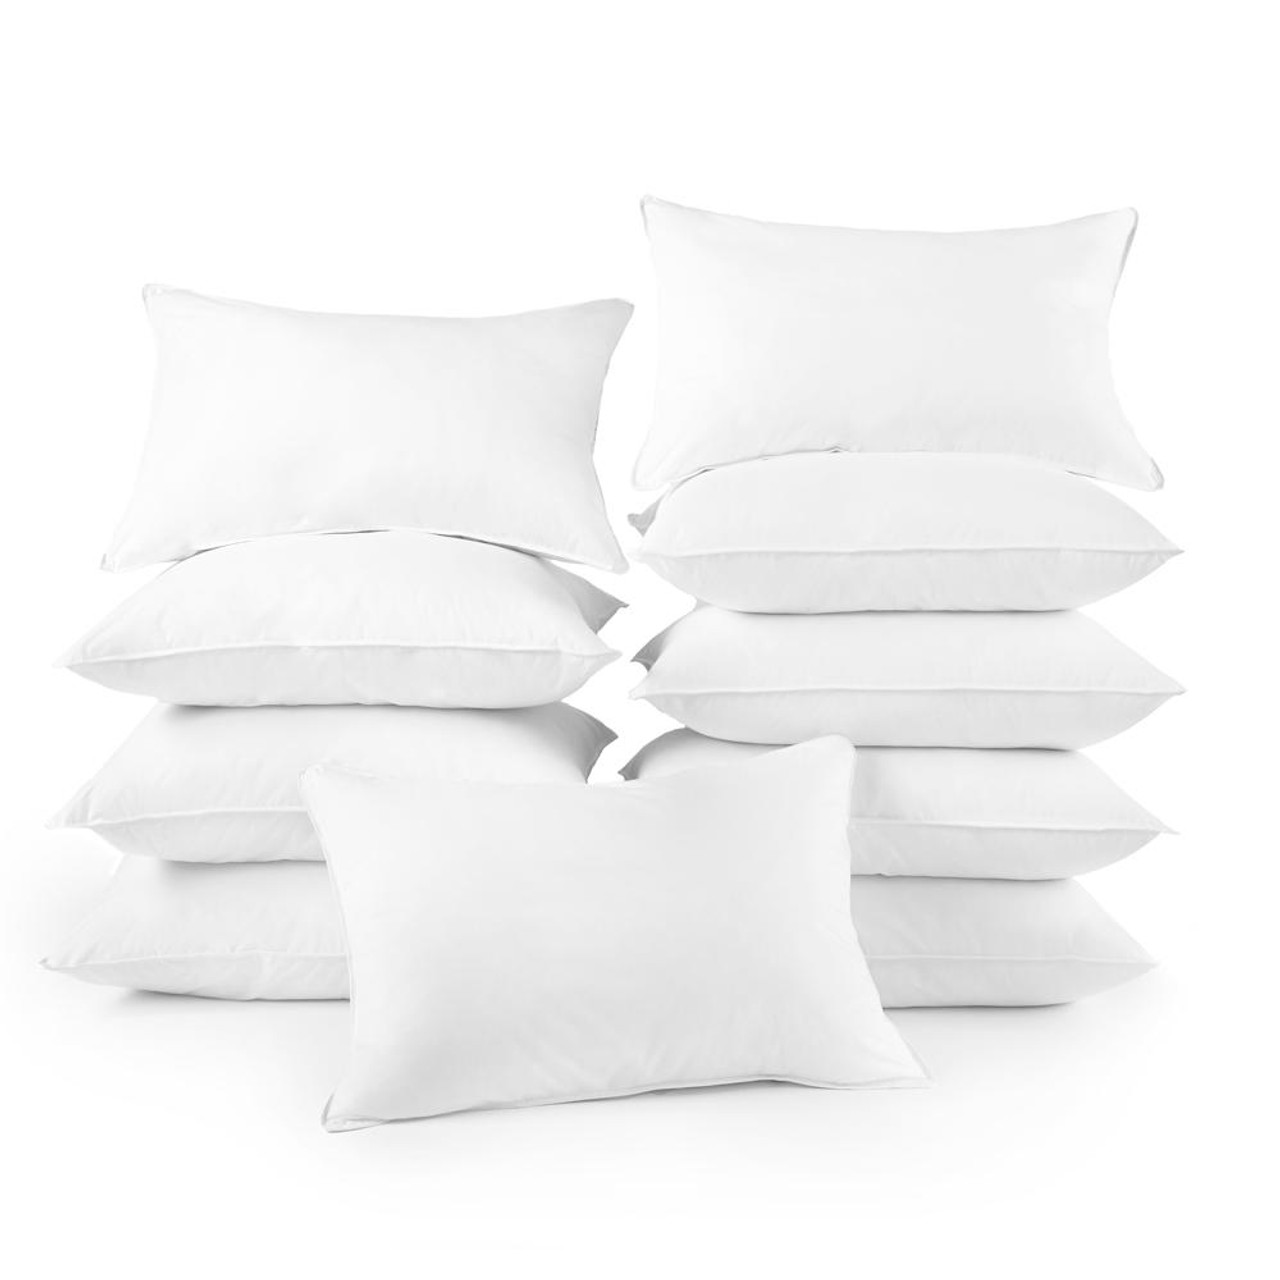 https://cdn11.bigcommerce.com/s-j8lceuq/images/stencil/1280x1280/products/363/4623/downlite-downlite-soft-density-230-tc-value-10-pack-pillow-sale-perfect-for-rental-homes__03425.1641429346.jpg?c=2